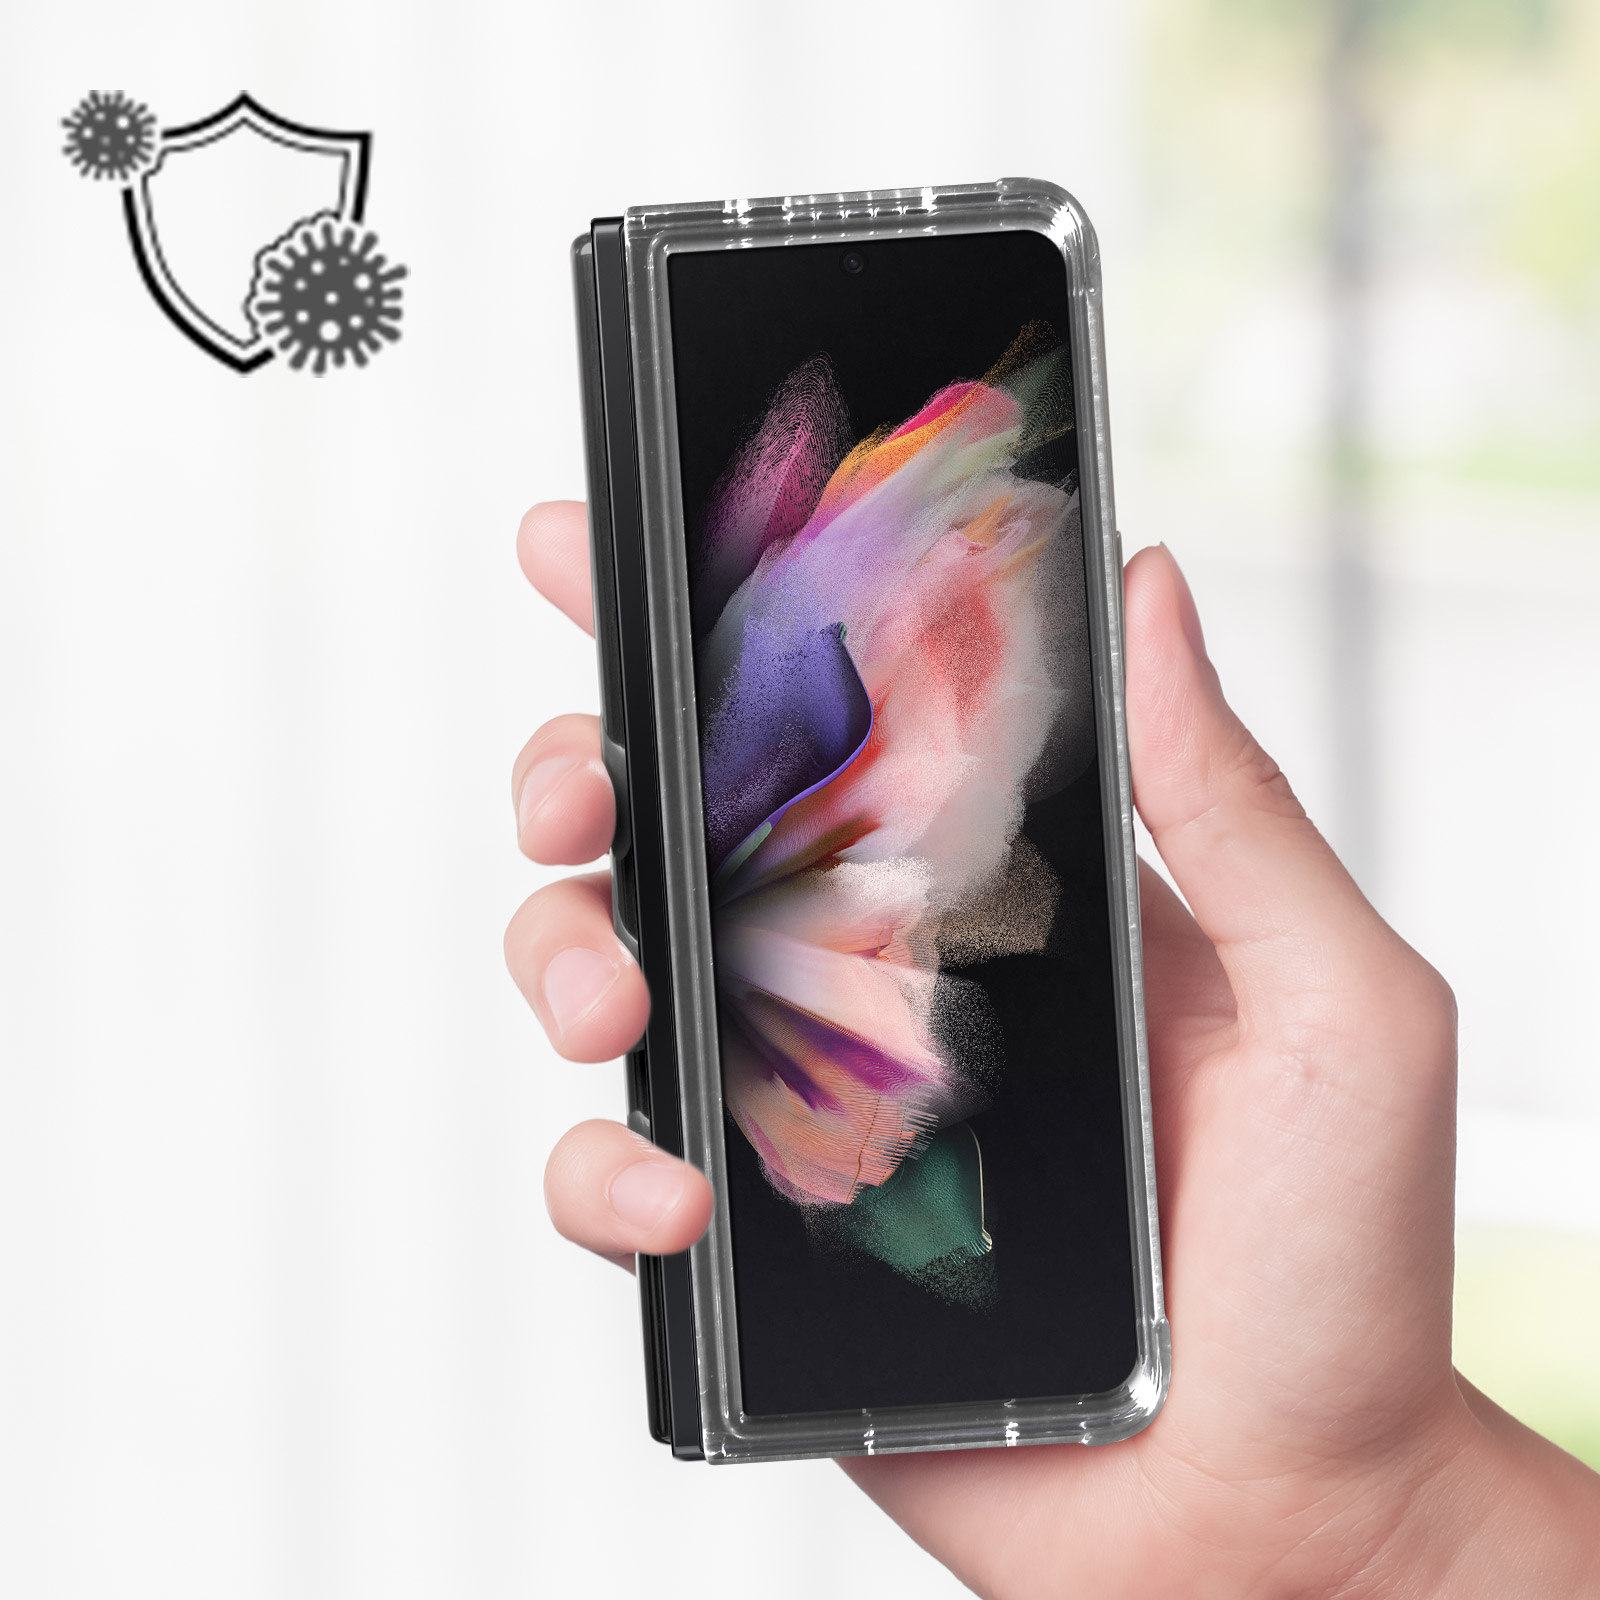 FORCE CASE X Cross Backcover, Series, Samsung, 3, Transparent Galaxy Z Fold Impact